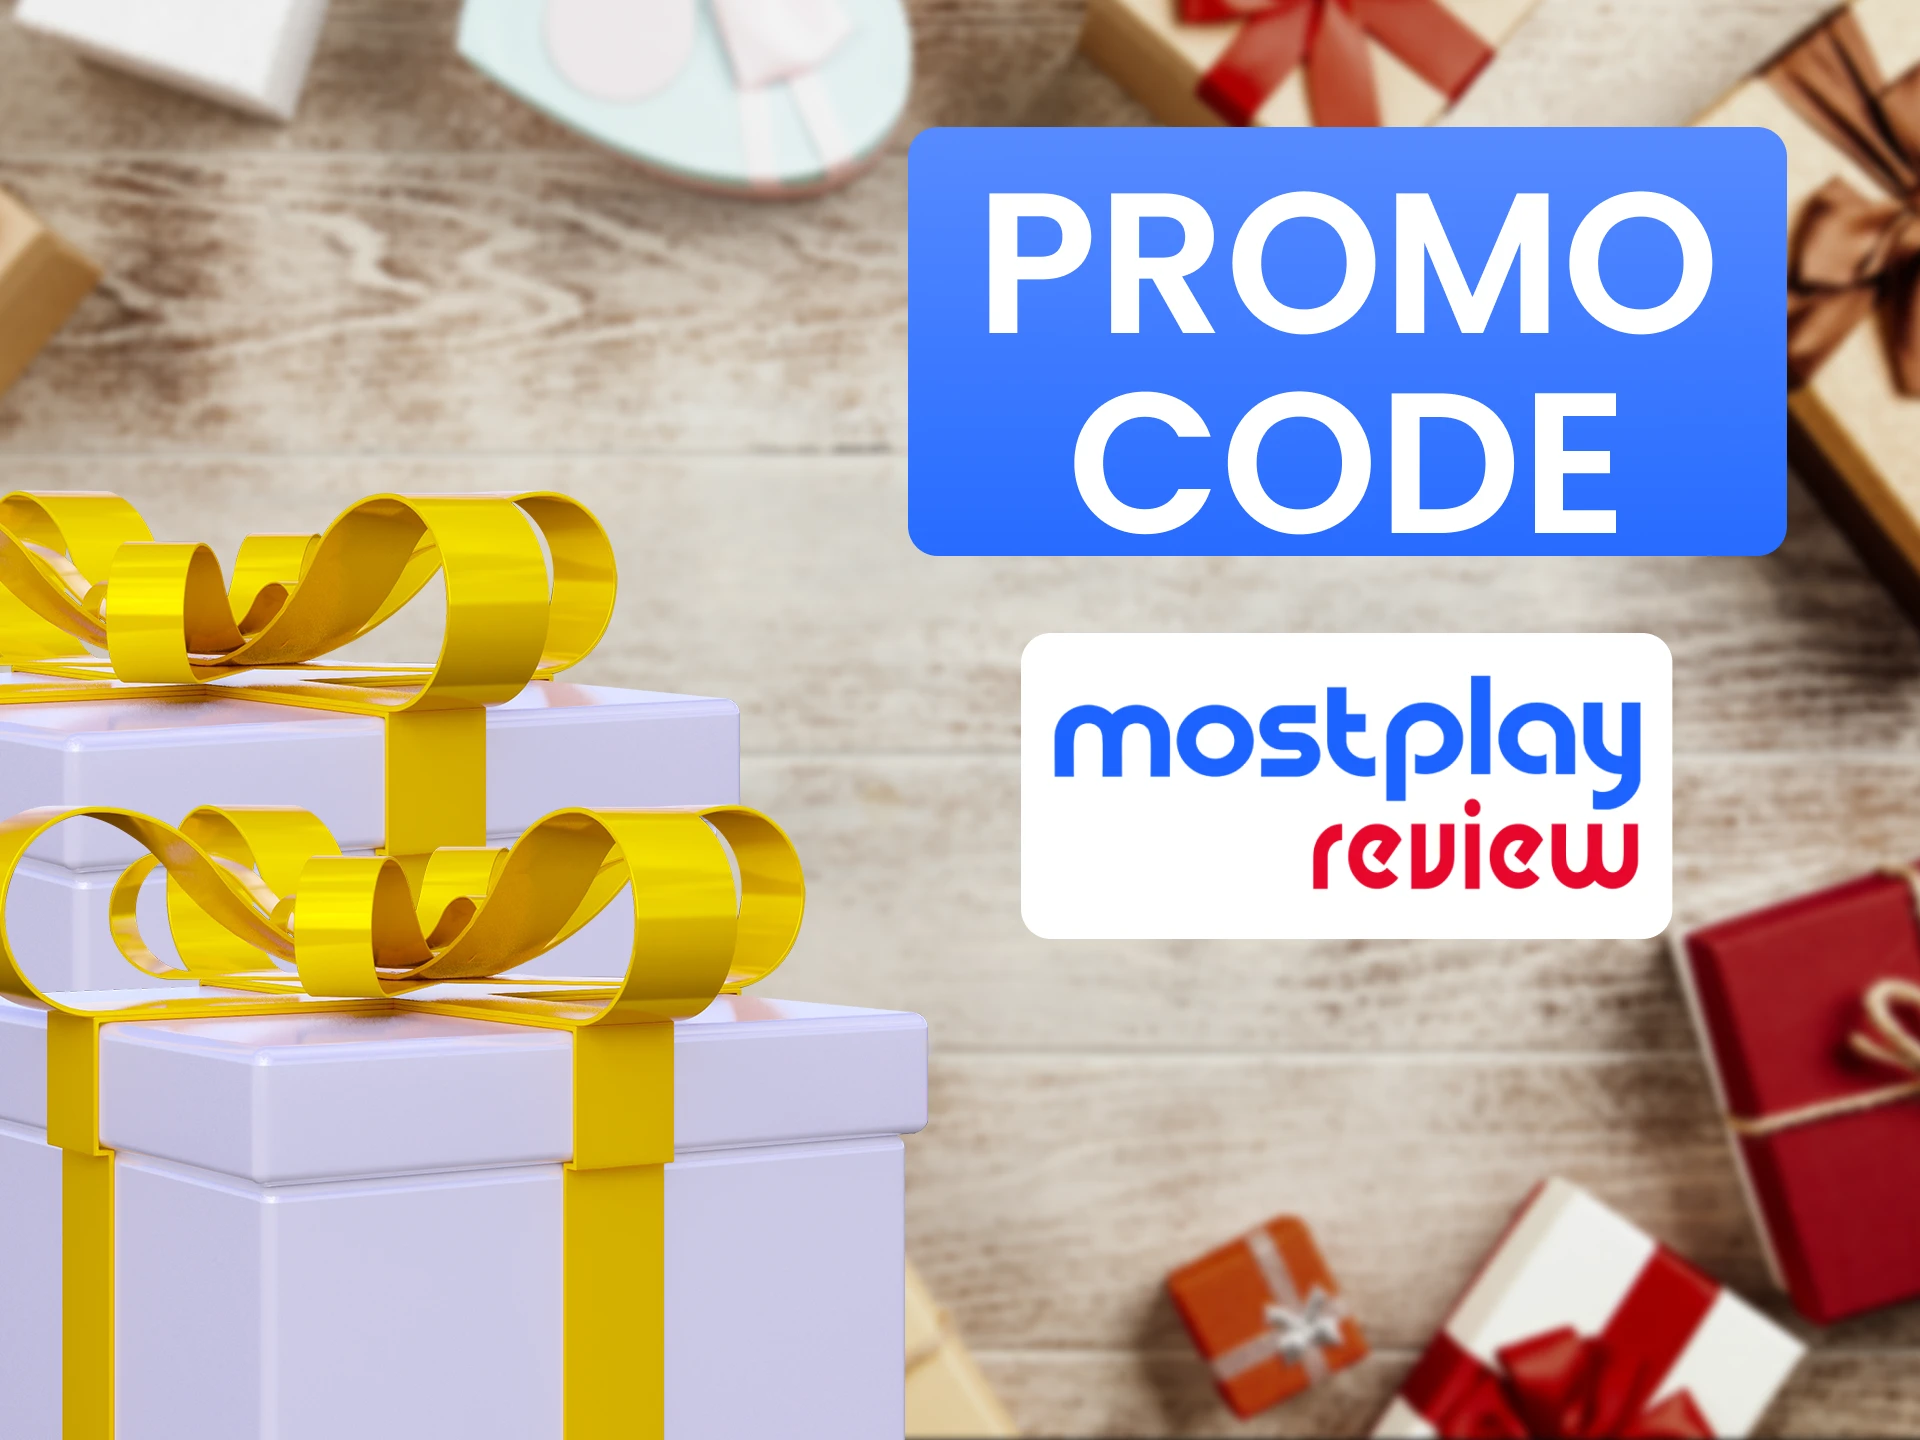 Enter the promotional code and receive bonuses from Mostplay.